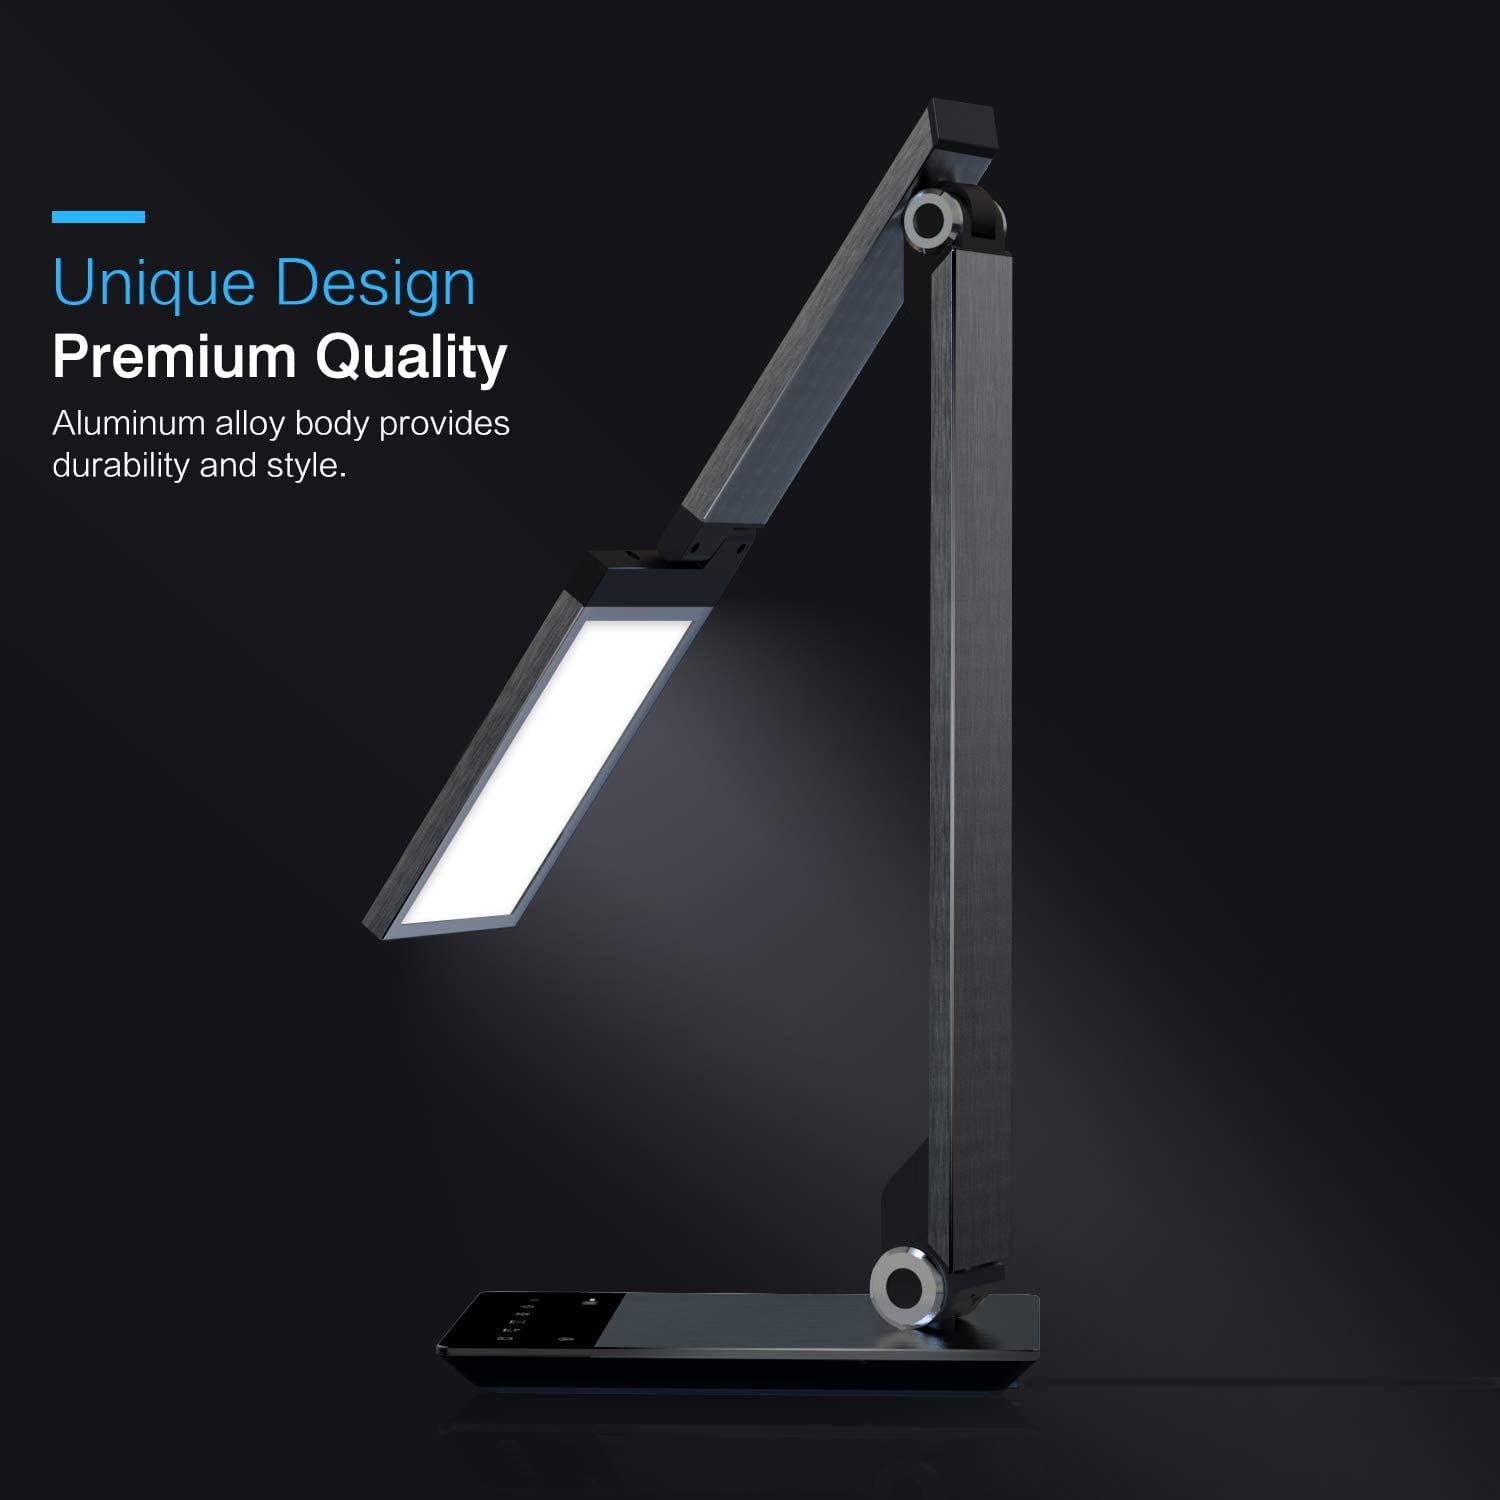 Sleep Mode LED Desk Lamp 5V 2.4A USB Charging Port MoKo Smart Touch Stylish Metal Table Lamp Space Gray Memory Function Rotatable Home Office Lamp with Stepless Brightness/Color Temperature